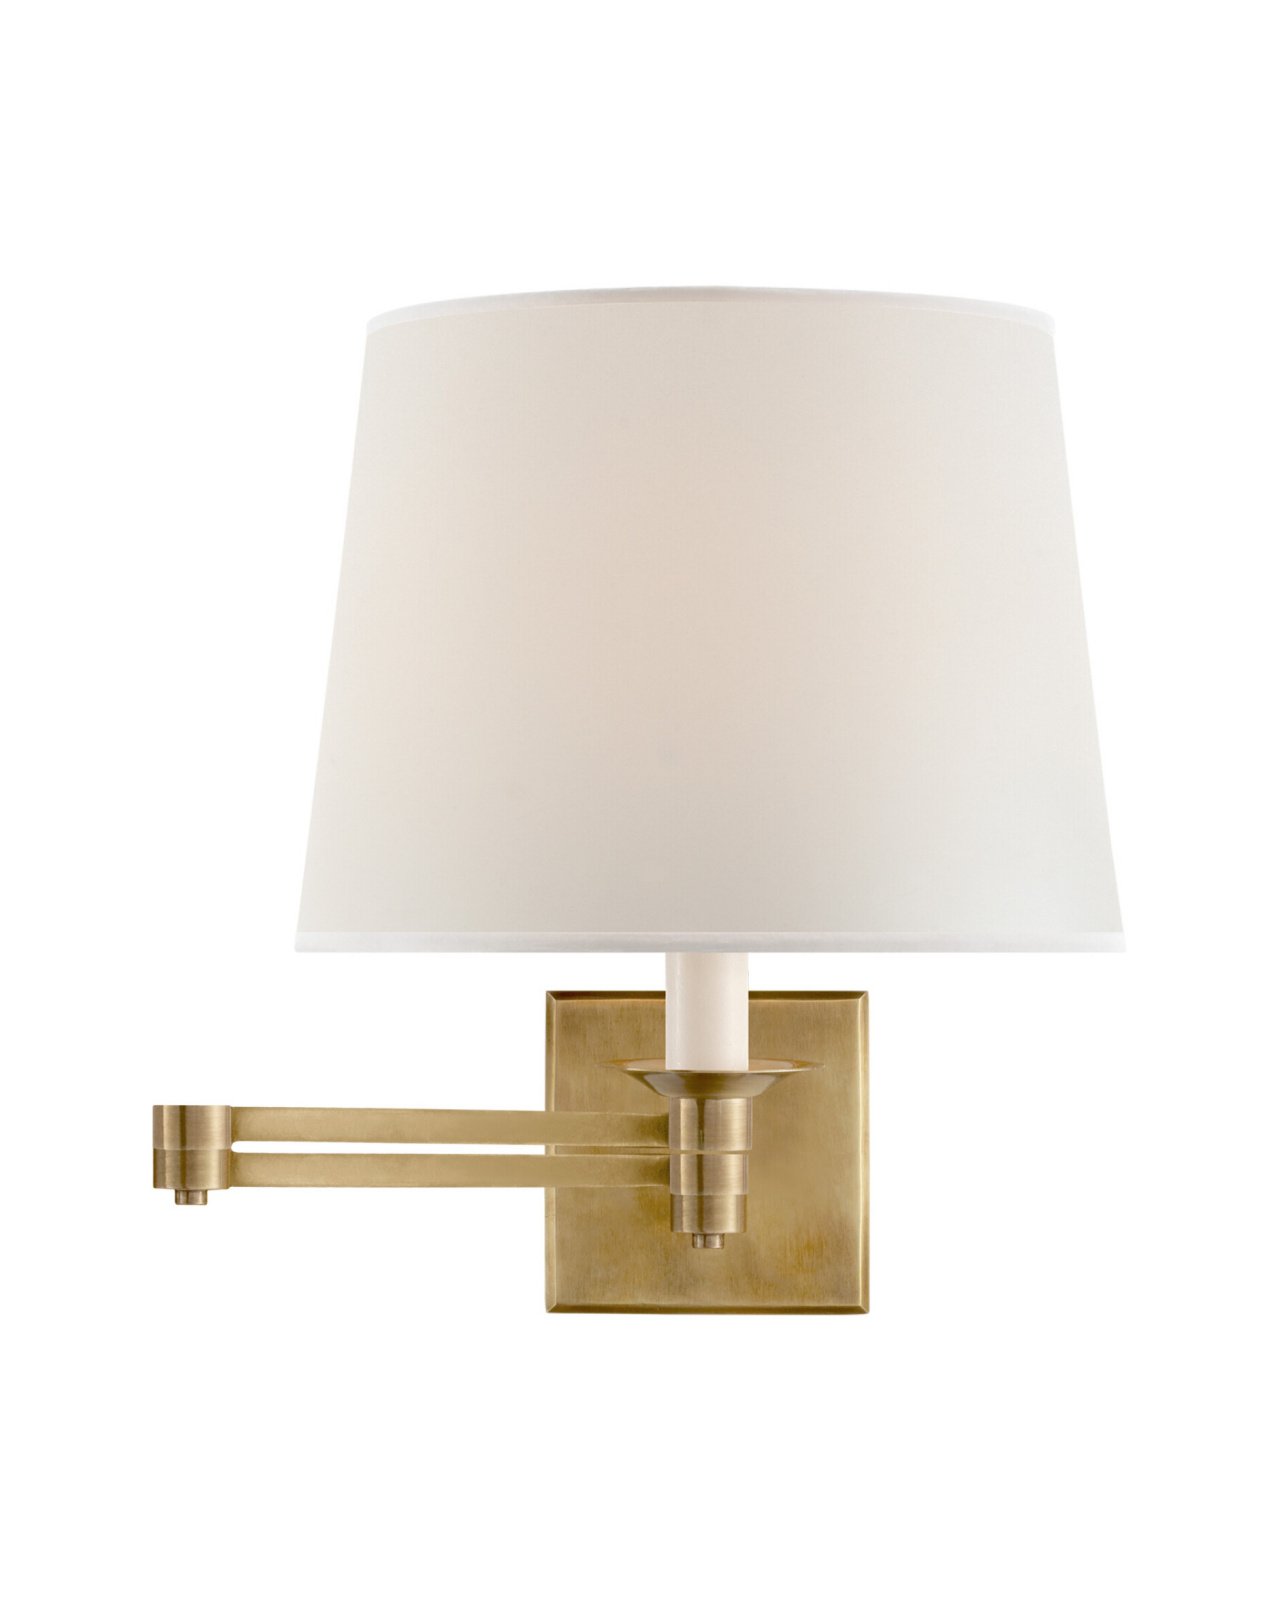 Evans Swing Arm Sconce Natural Brass